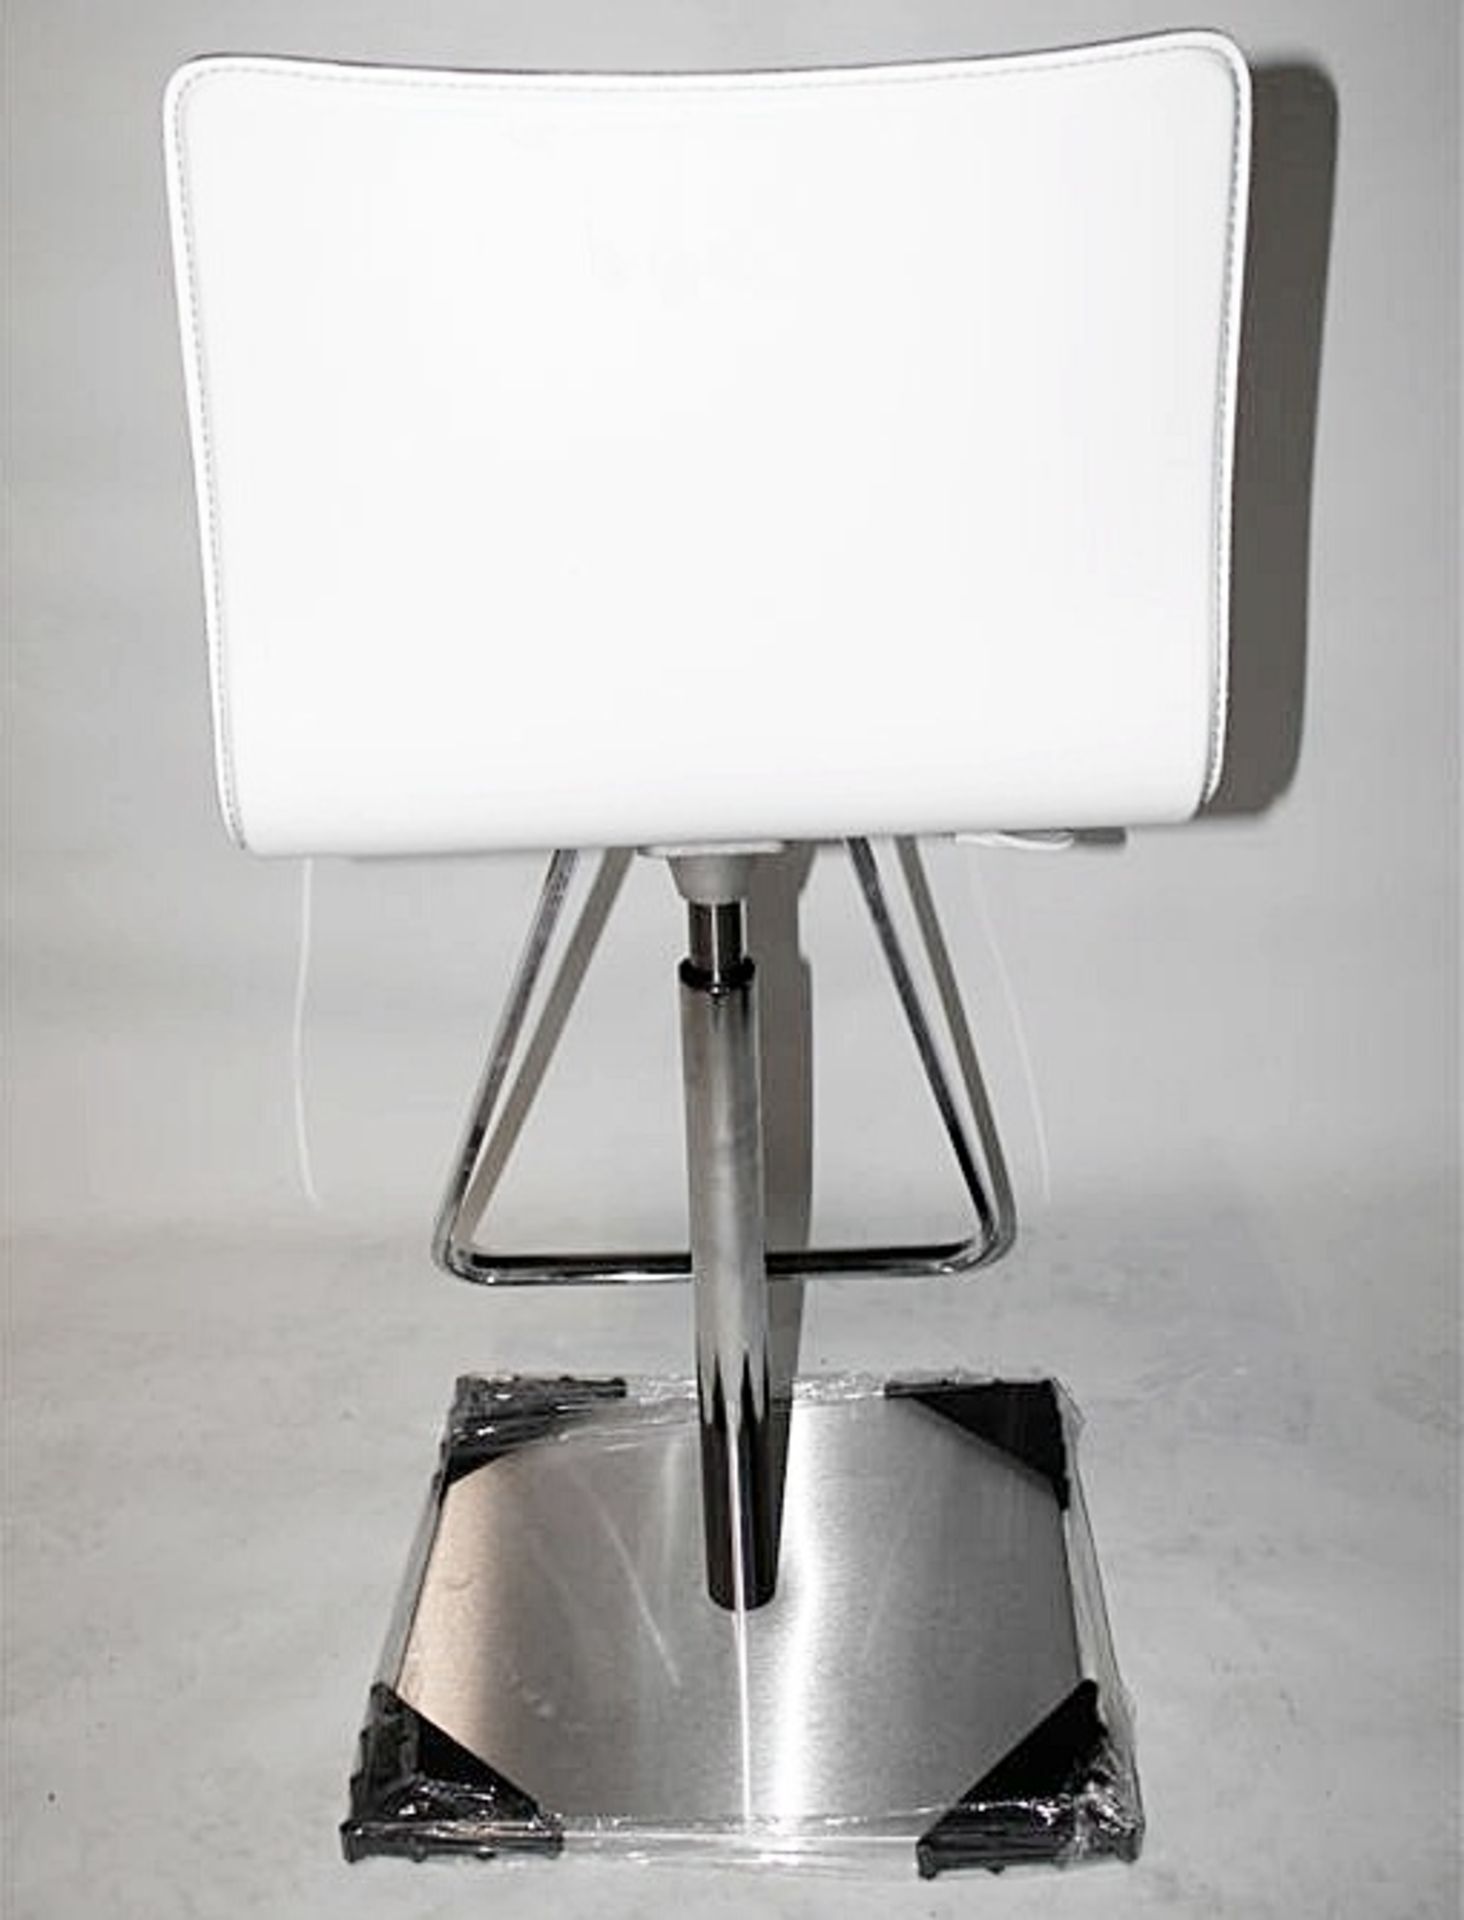 1 x CATTELAN "Toto" Stool - White With Black Stitching  - Made In Italy - Ref: 3352787 - CL087 - - Image 3 of 9